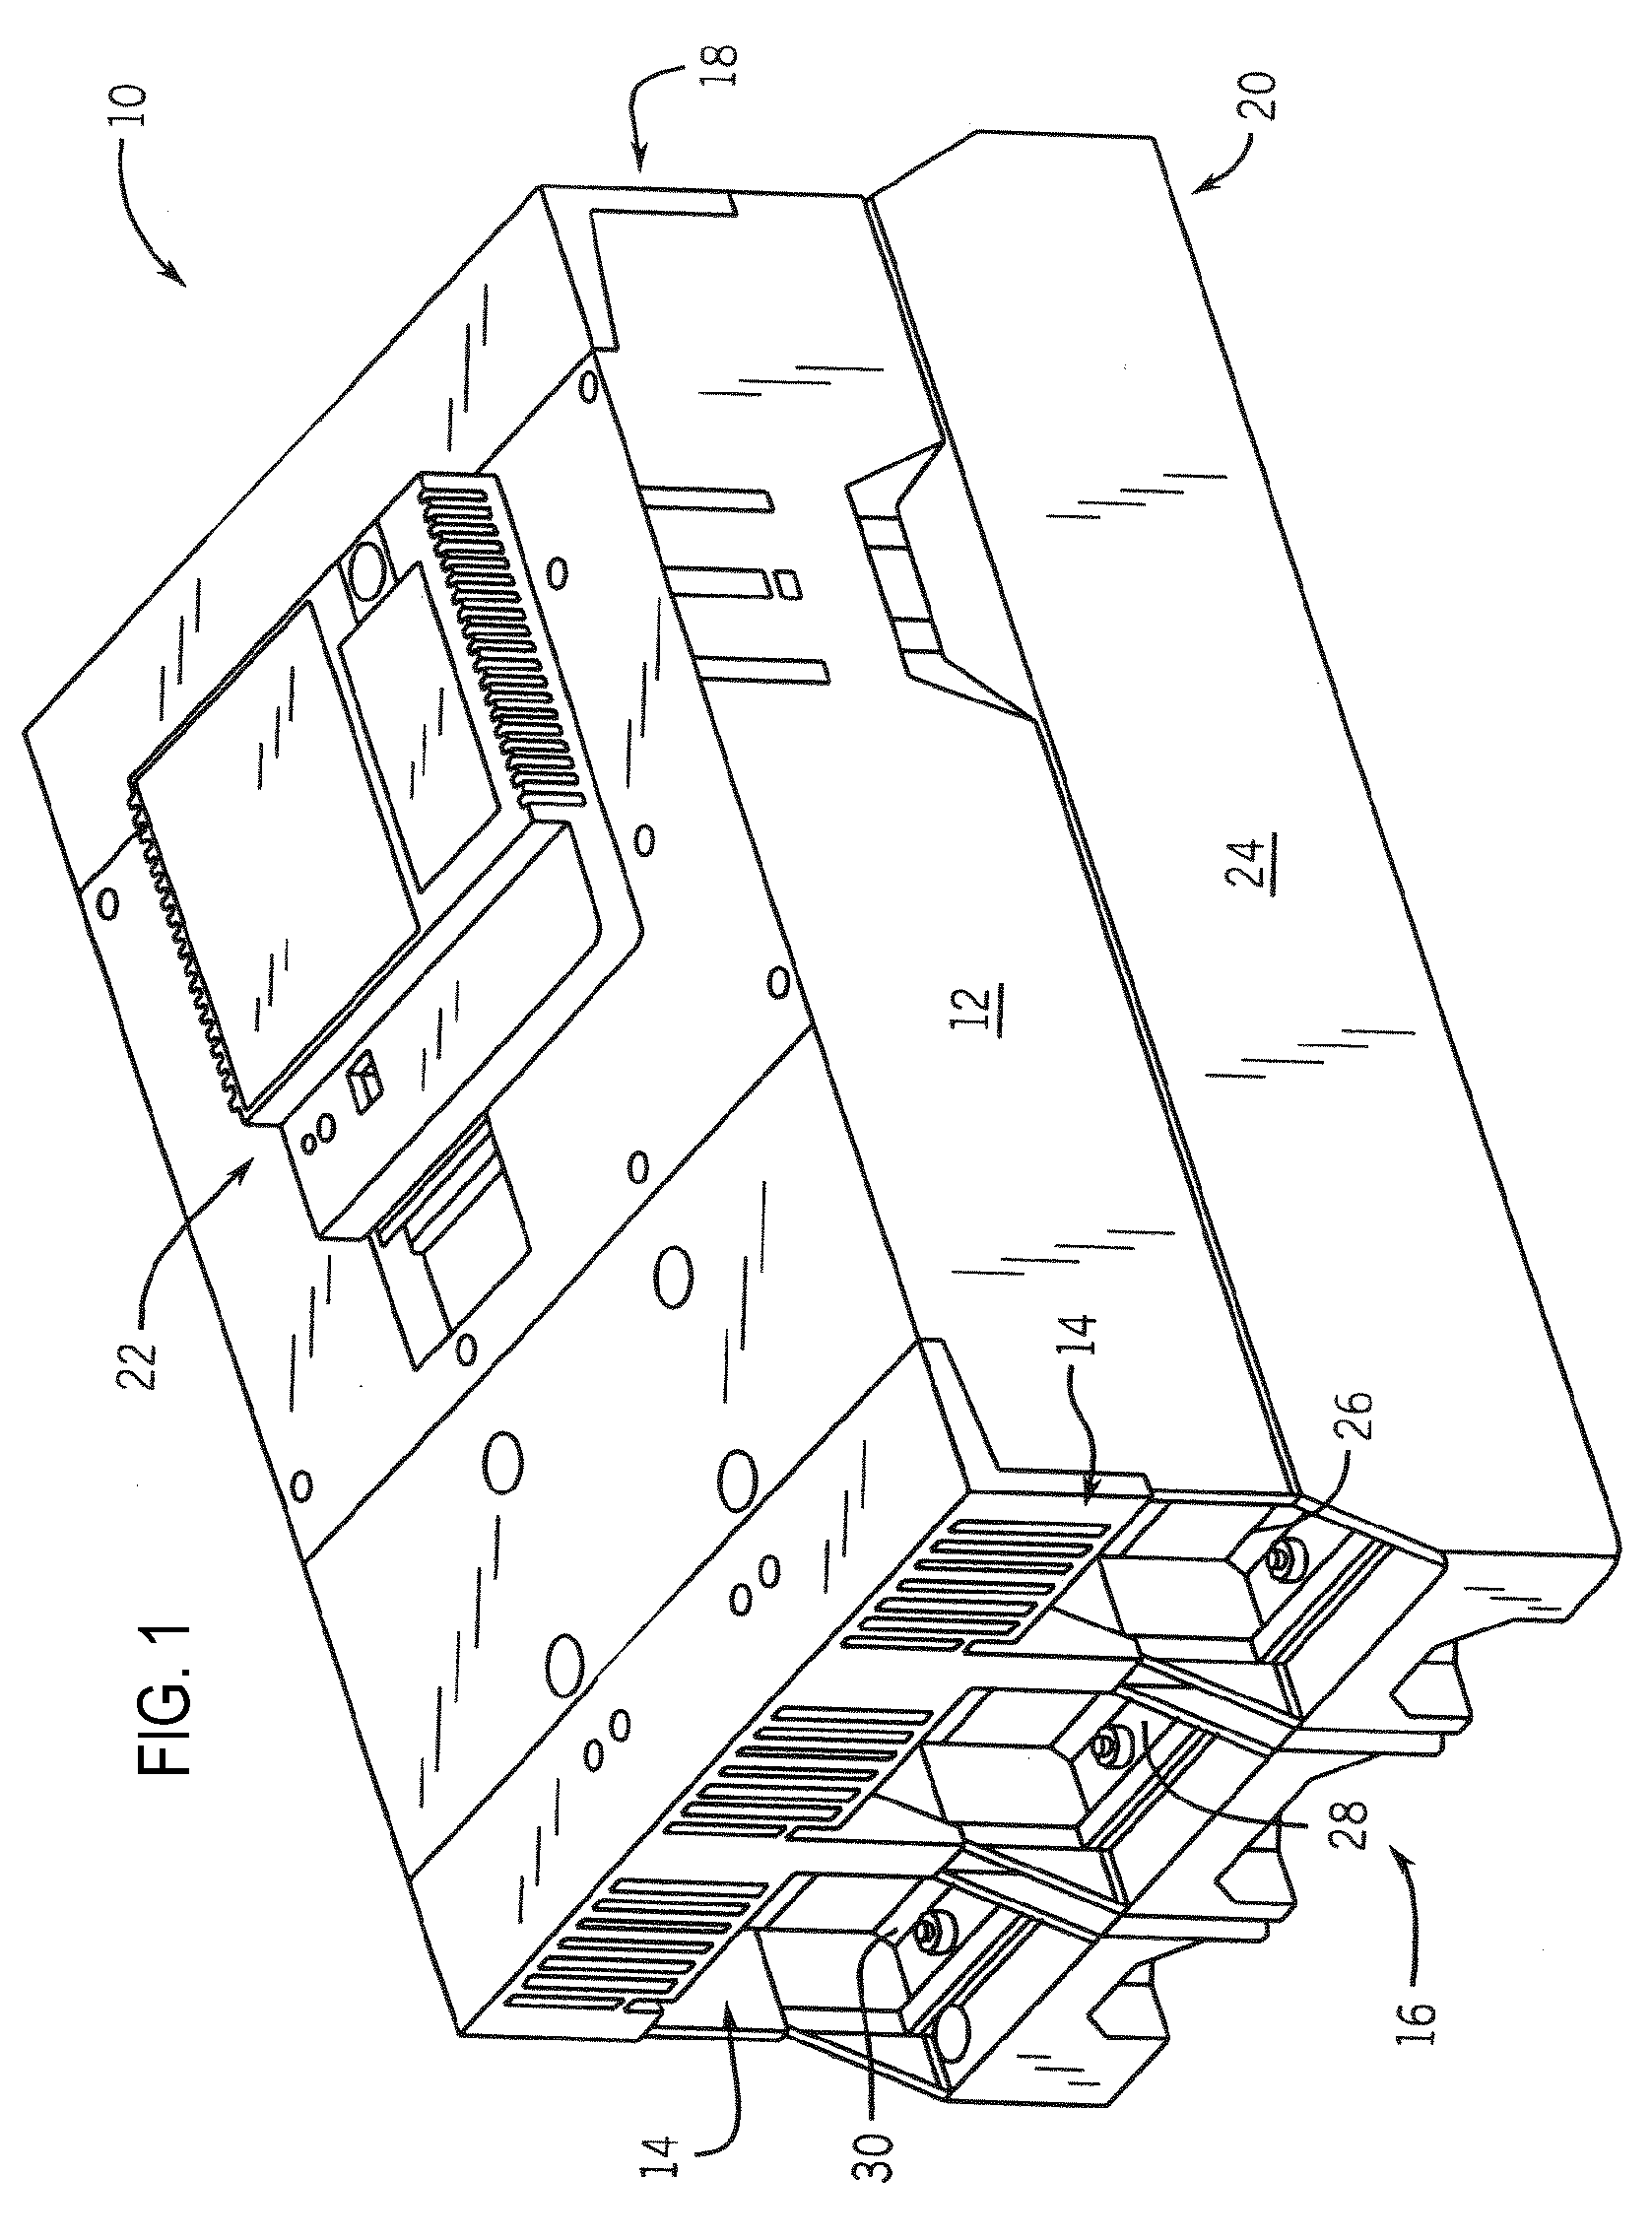 System and method for monitoring and controlling stator winding temperature in a de-energized ac motor